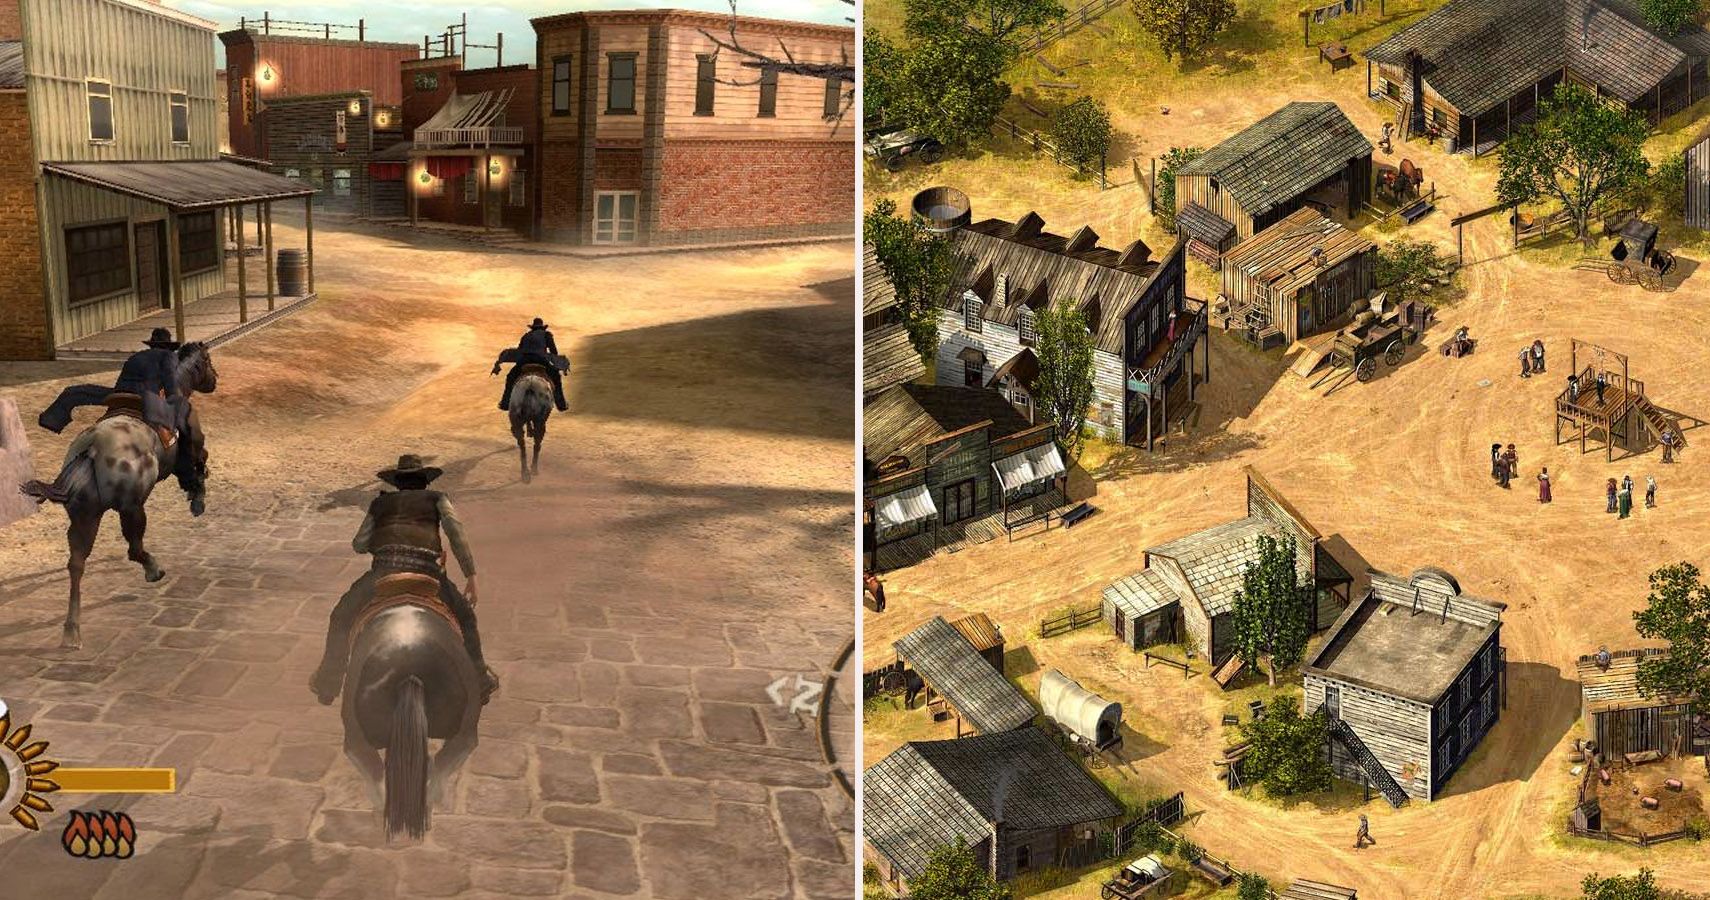 The 10 Best Games That Let You Play As A Cowboy